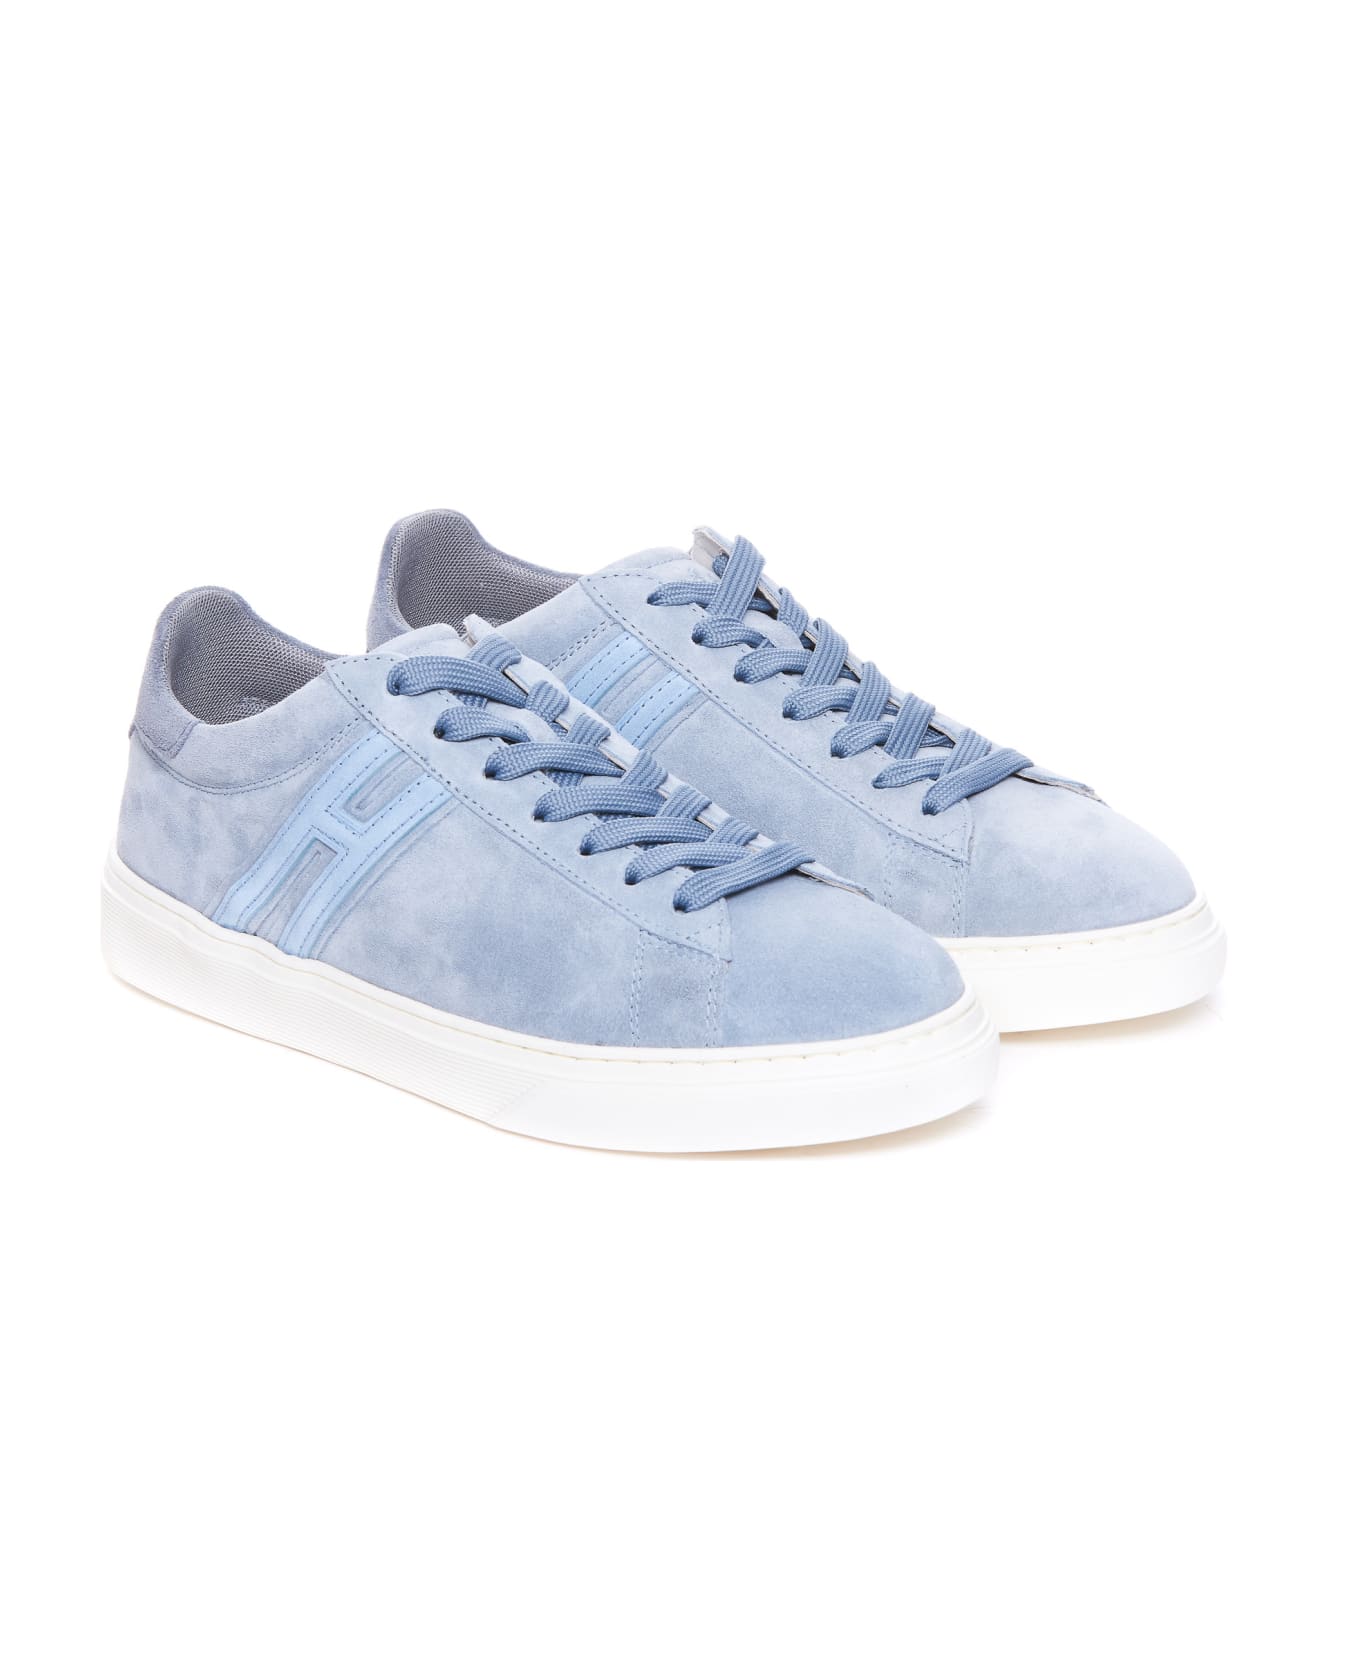 Hogan H365 Laced H Sneakers - Blue